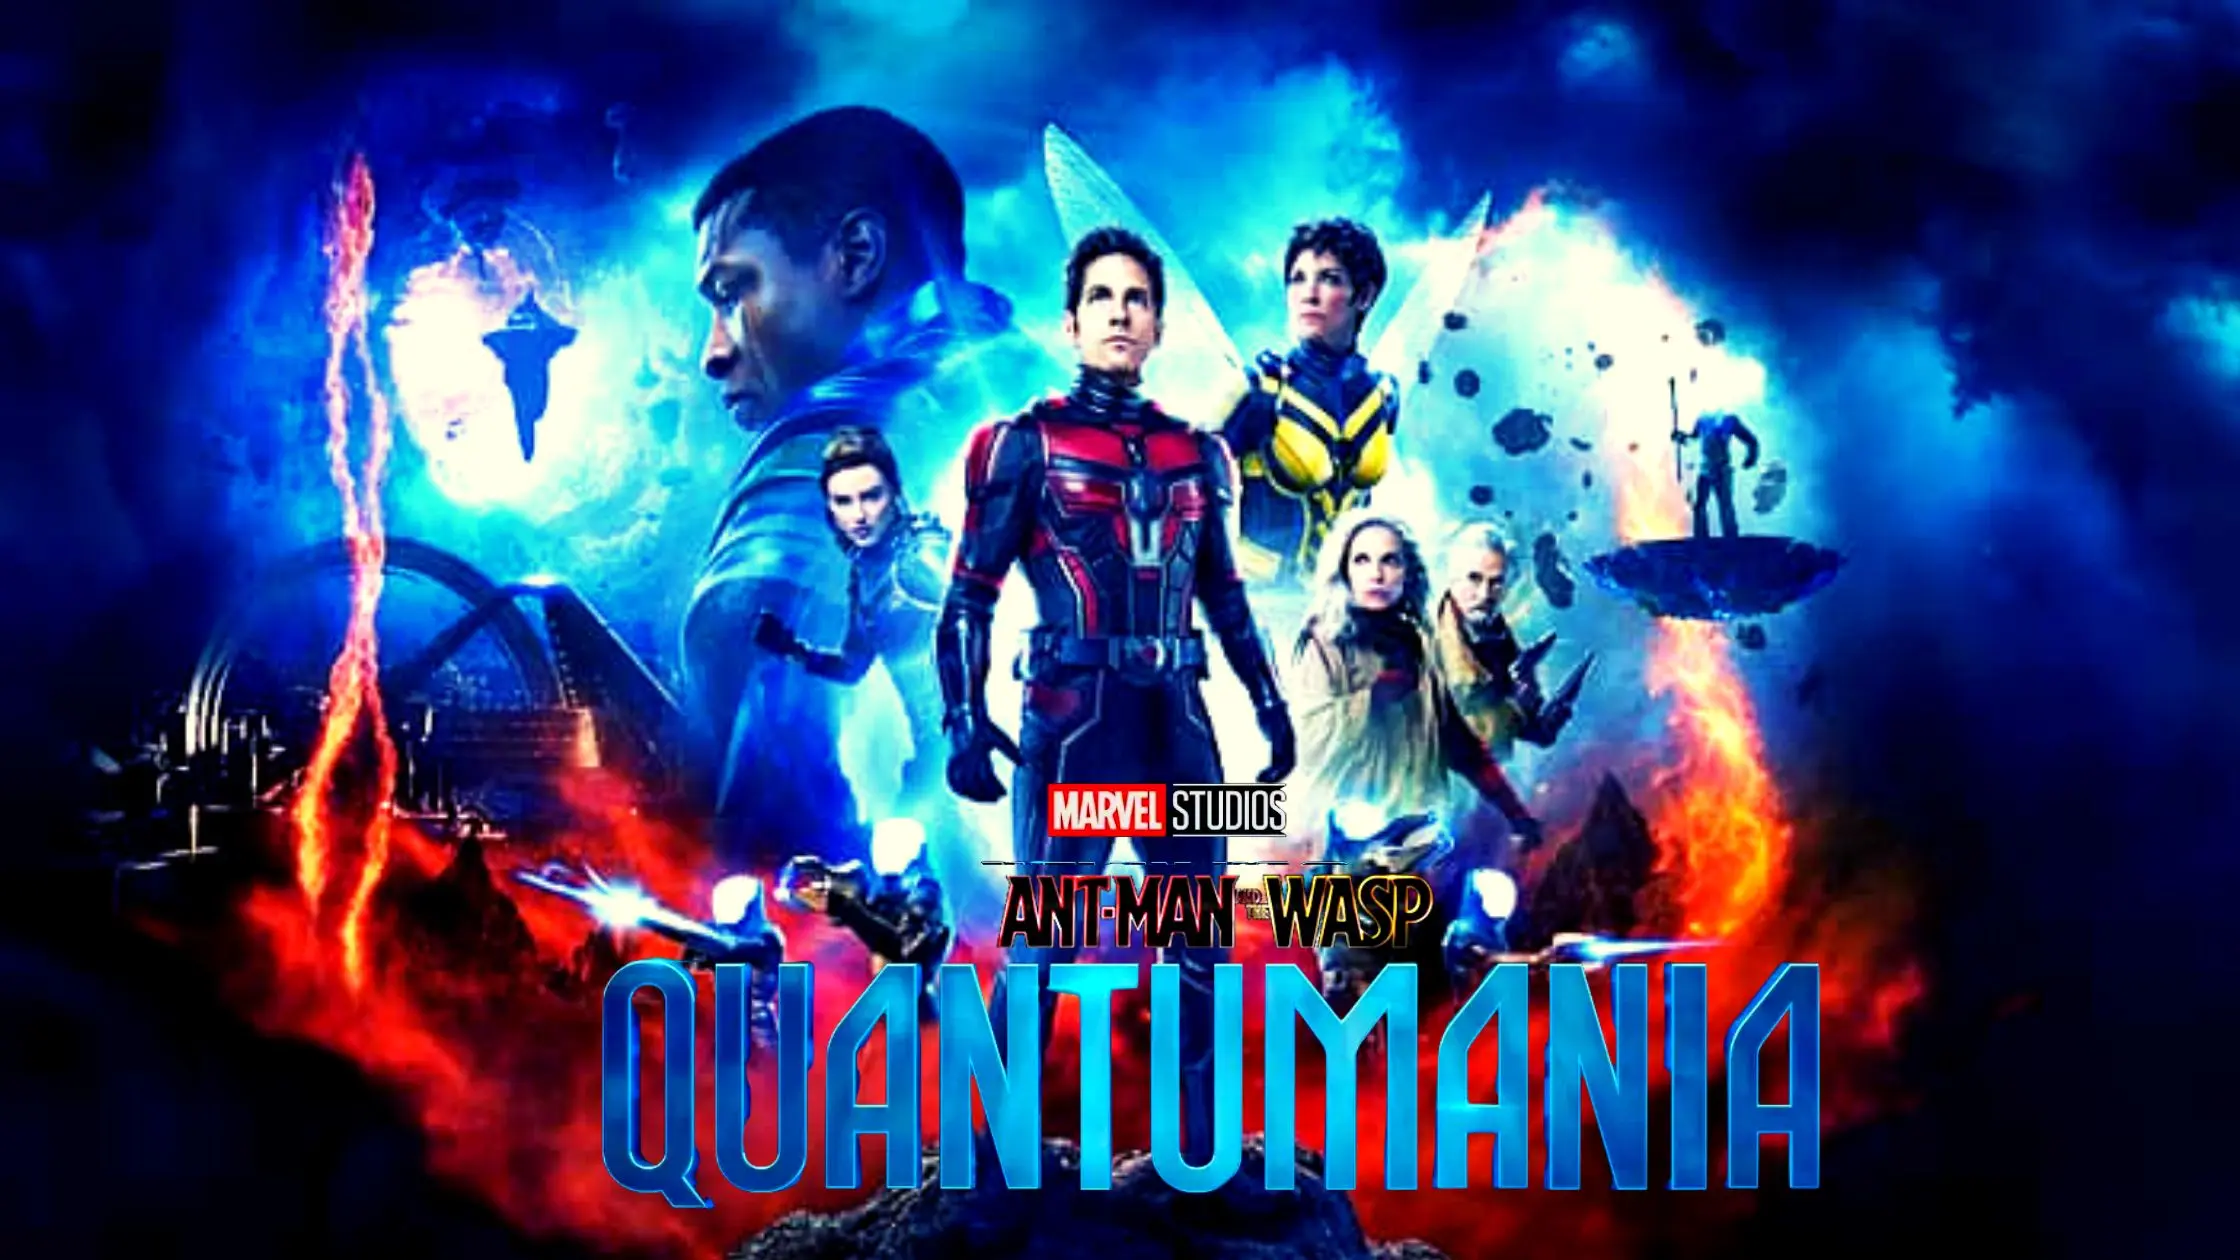 Ant-Man And The Wasp Quantumania Release Date, Cast, Plot, And More